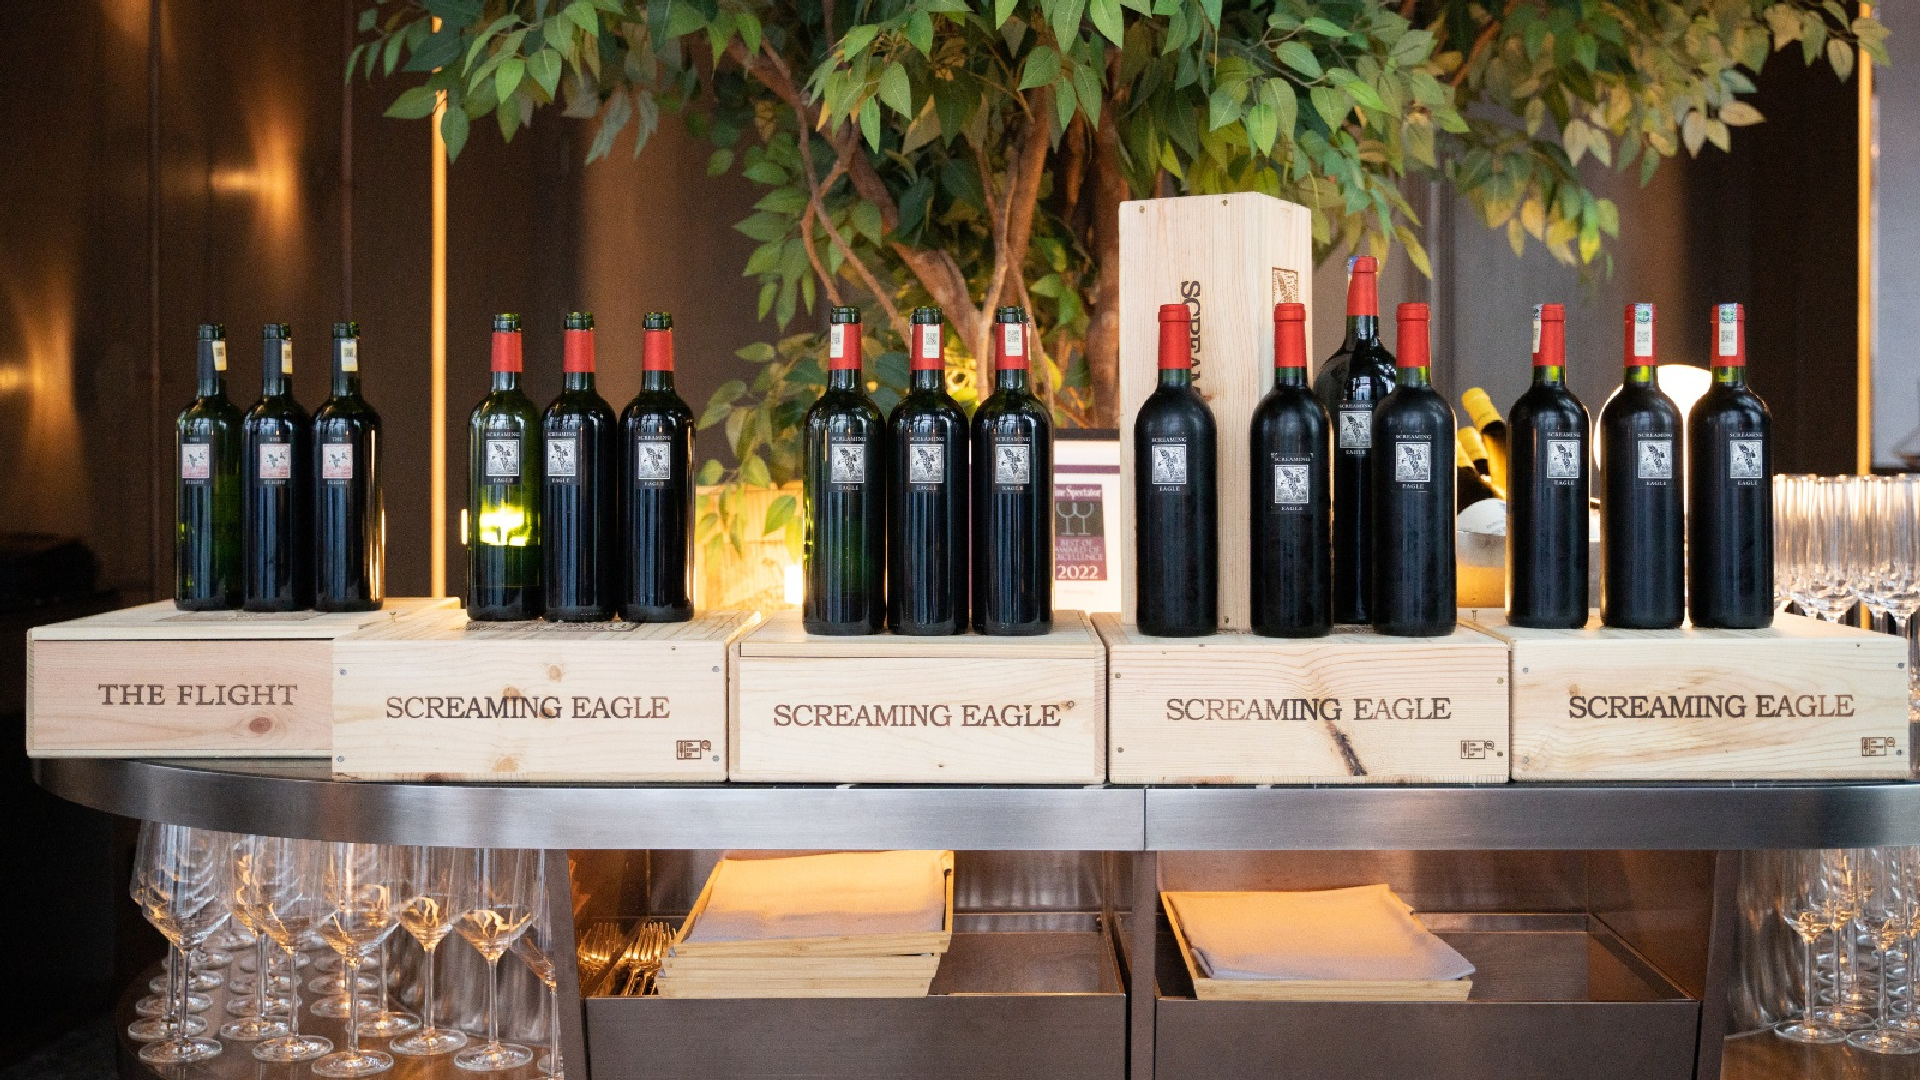 A Night with Screaming Eagle, a Rare and Highly Prized Vintage Wine